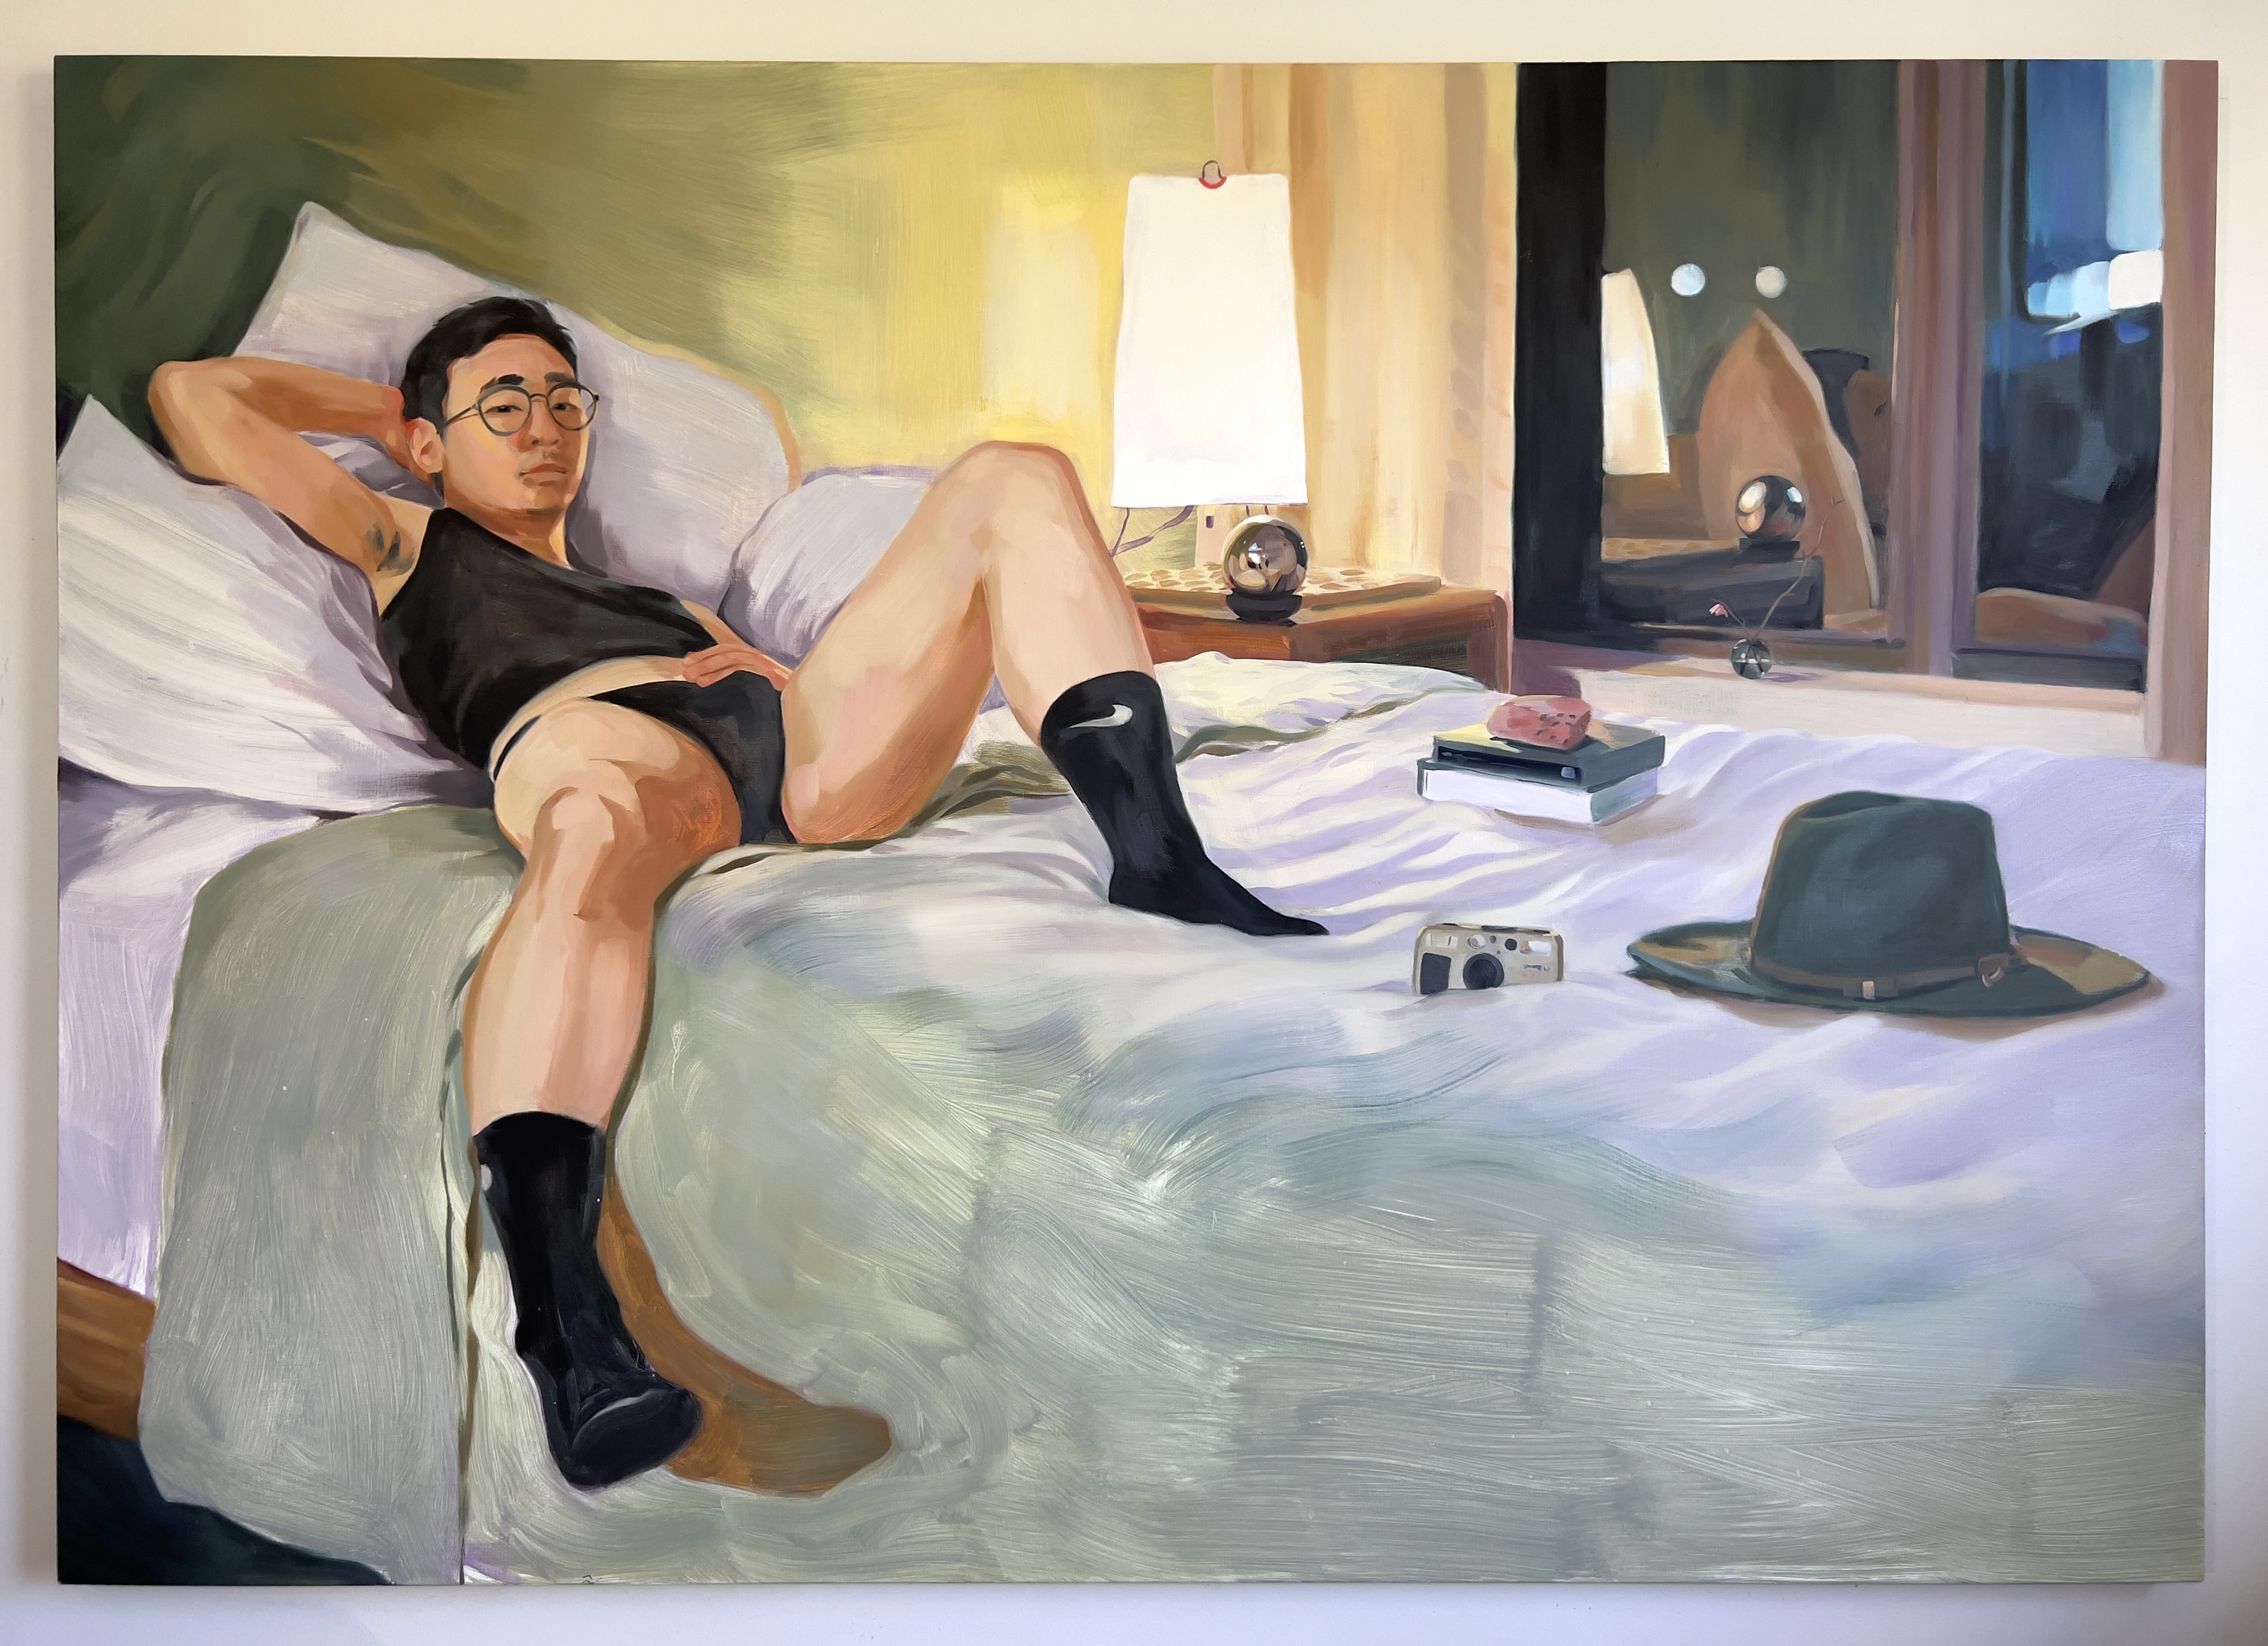 A painting of my dear friend Simon Sok. Simon is a member of my Queer and Trans Asian Pacific Islander community and chosen family in Brooklyn, New York. The painting depicts Simon in his home with a selection of his favorite objects